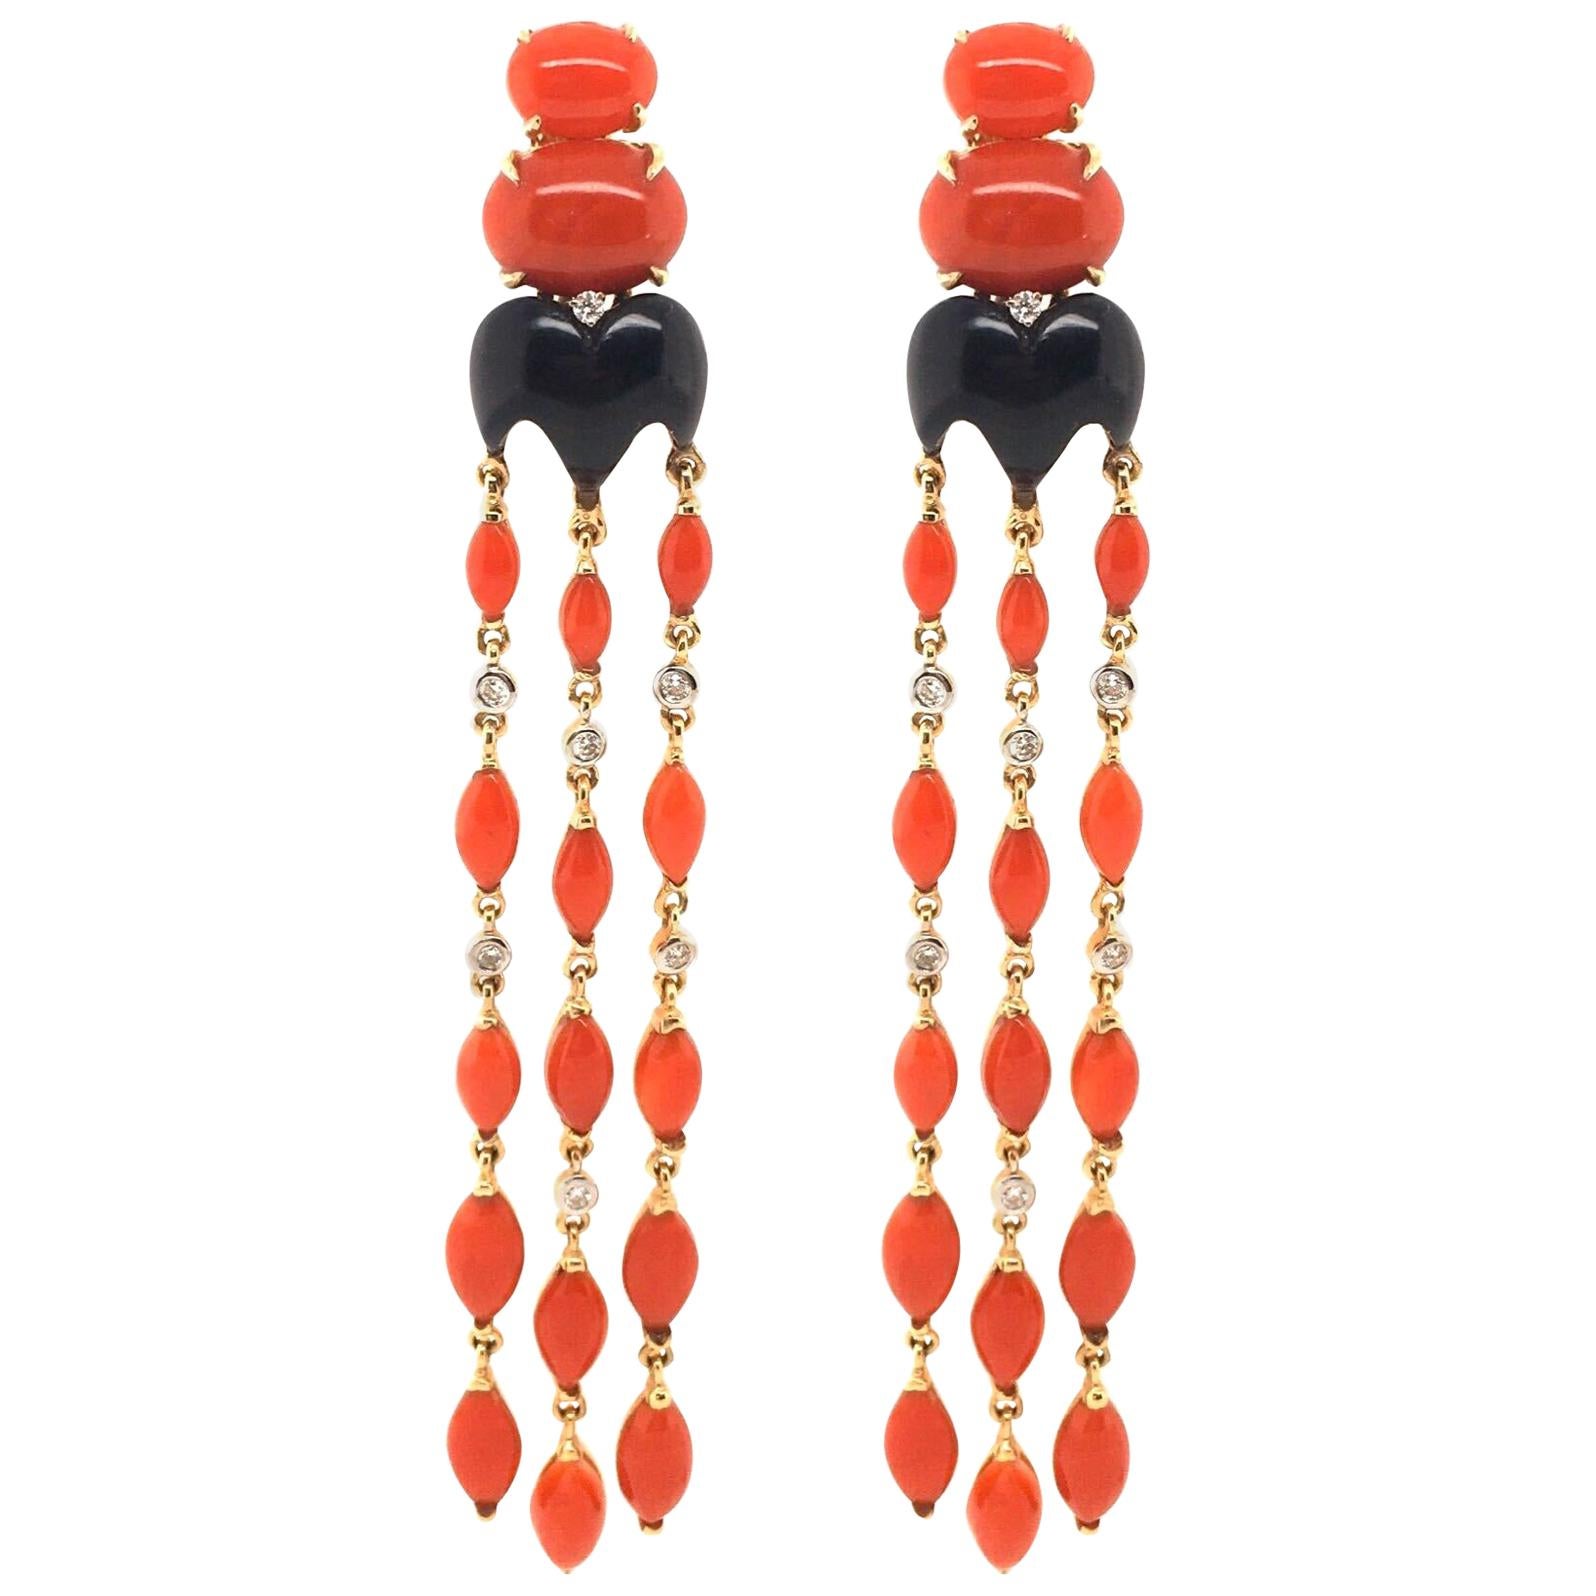 Pair of Gold, Coral, Black Onyx and Diamond Dangling Earrings